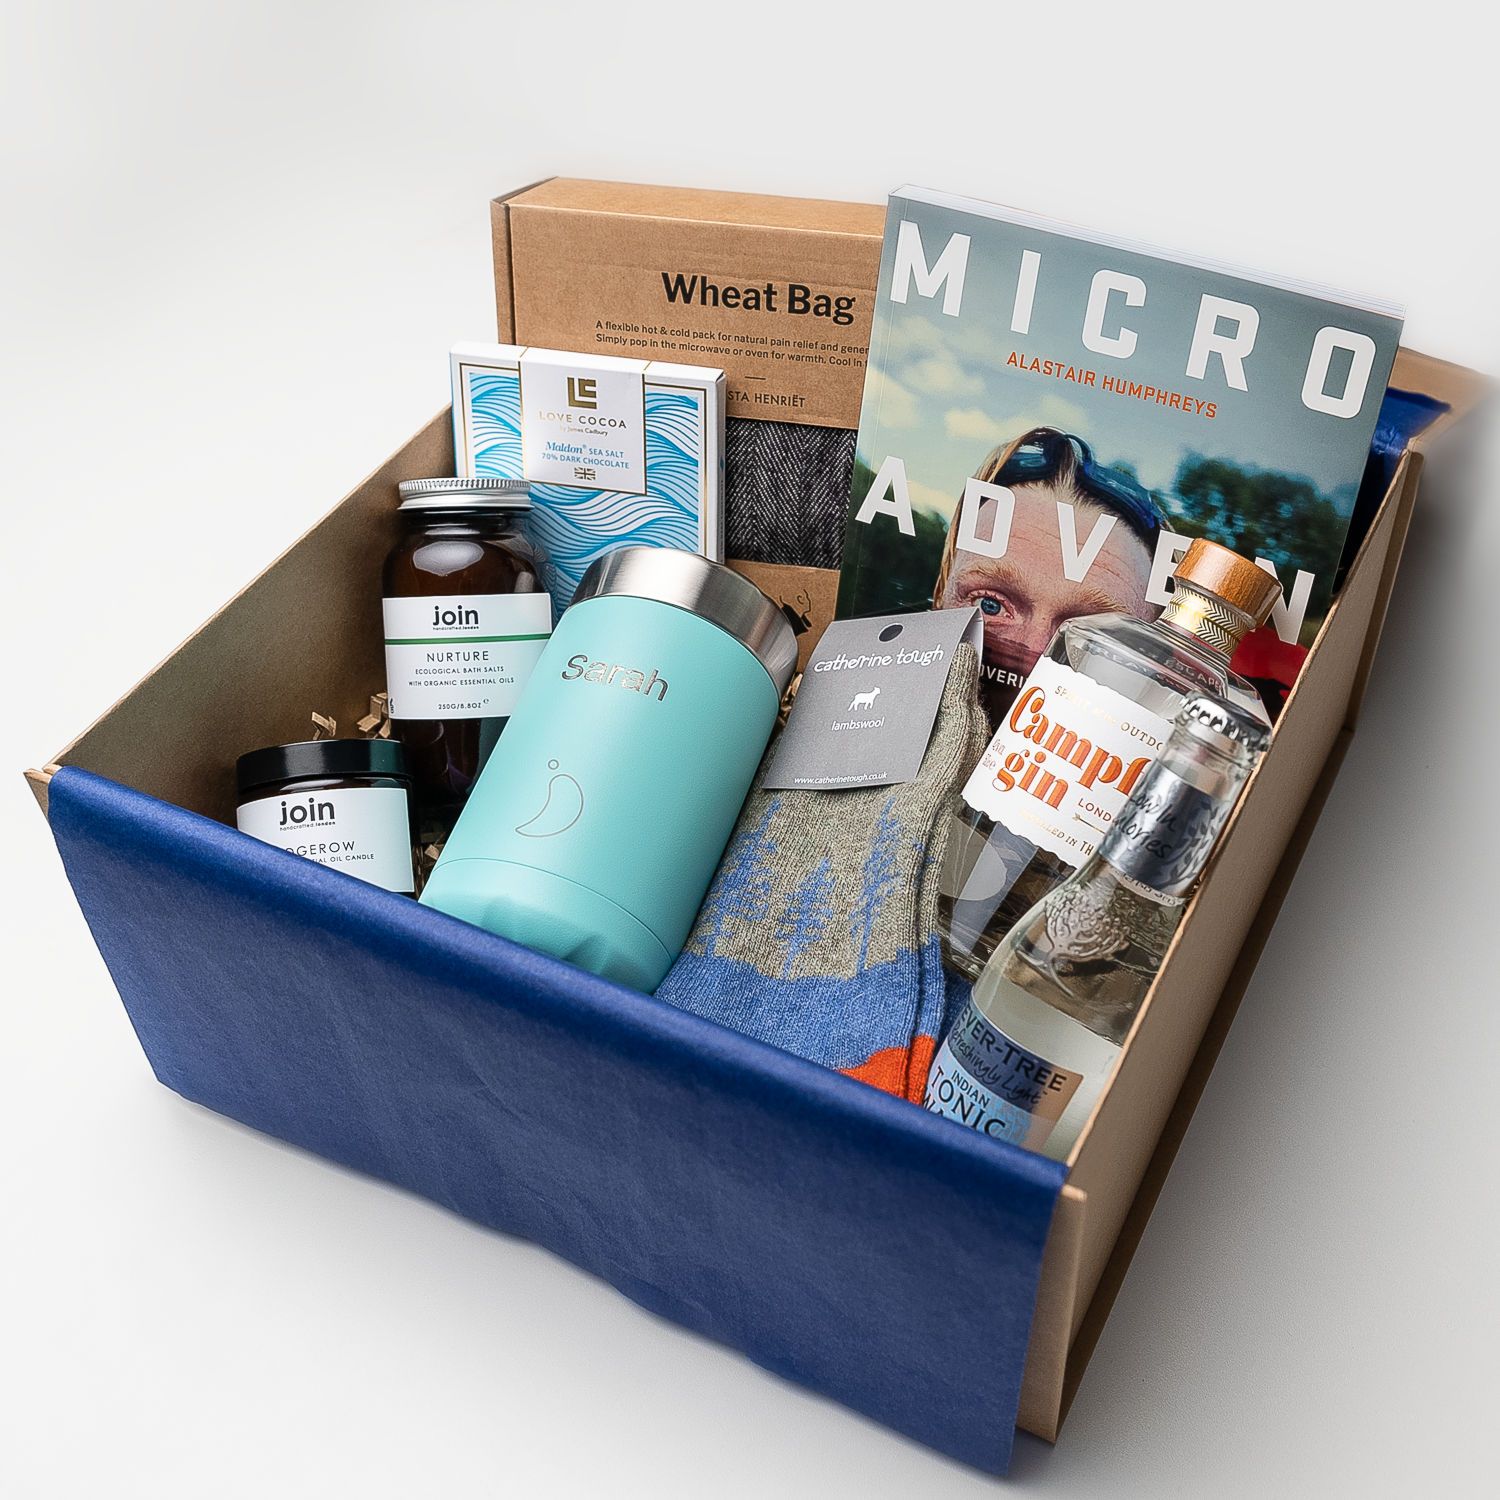 Wellbeing corporate gifts including Micro Adventures by Alastair Humphreys, Join bath salts and candle and Love Cocoa chocolate